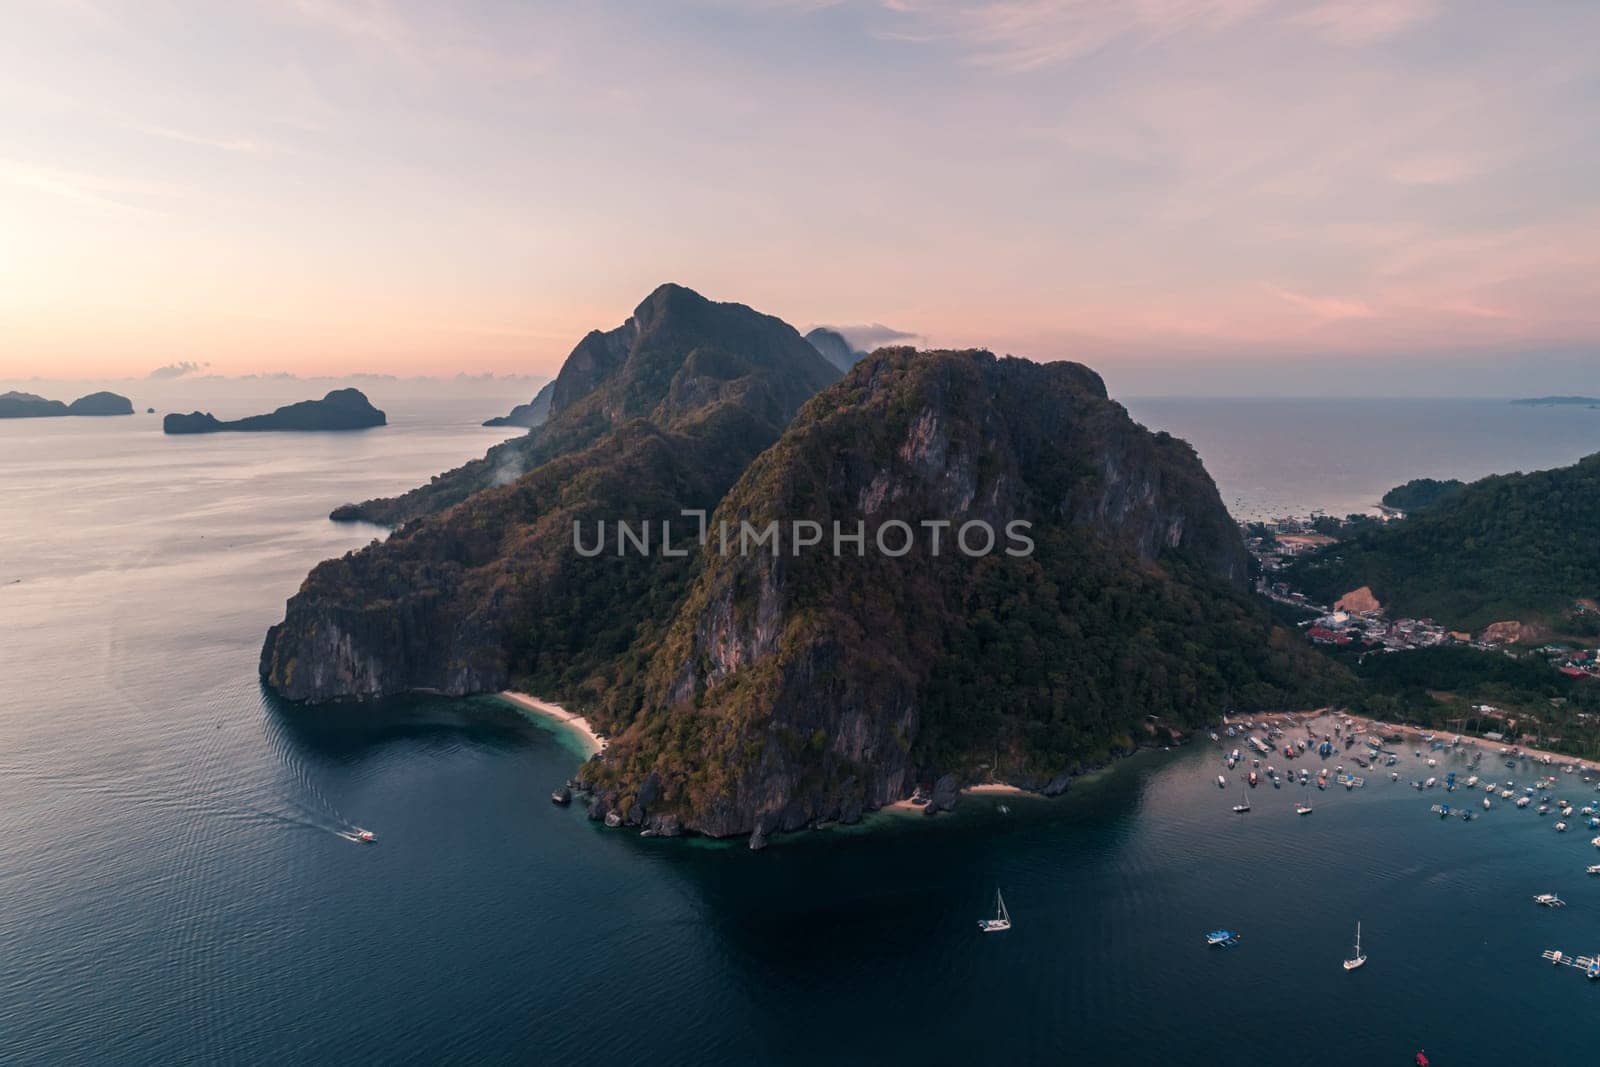 Aerial view of cliffs in the sea, yachts are sailing nearby, mountains covered with tropical forest. El Nido, Palawan, Philippines. by Busker